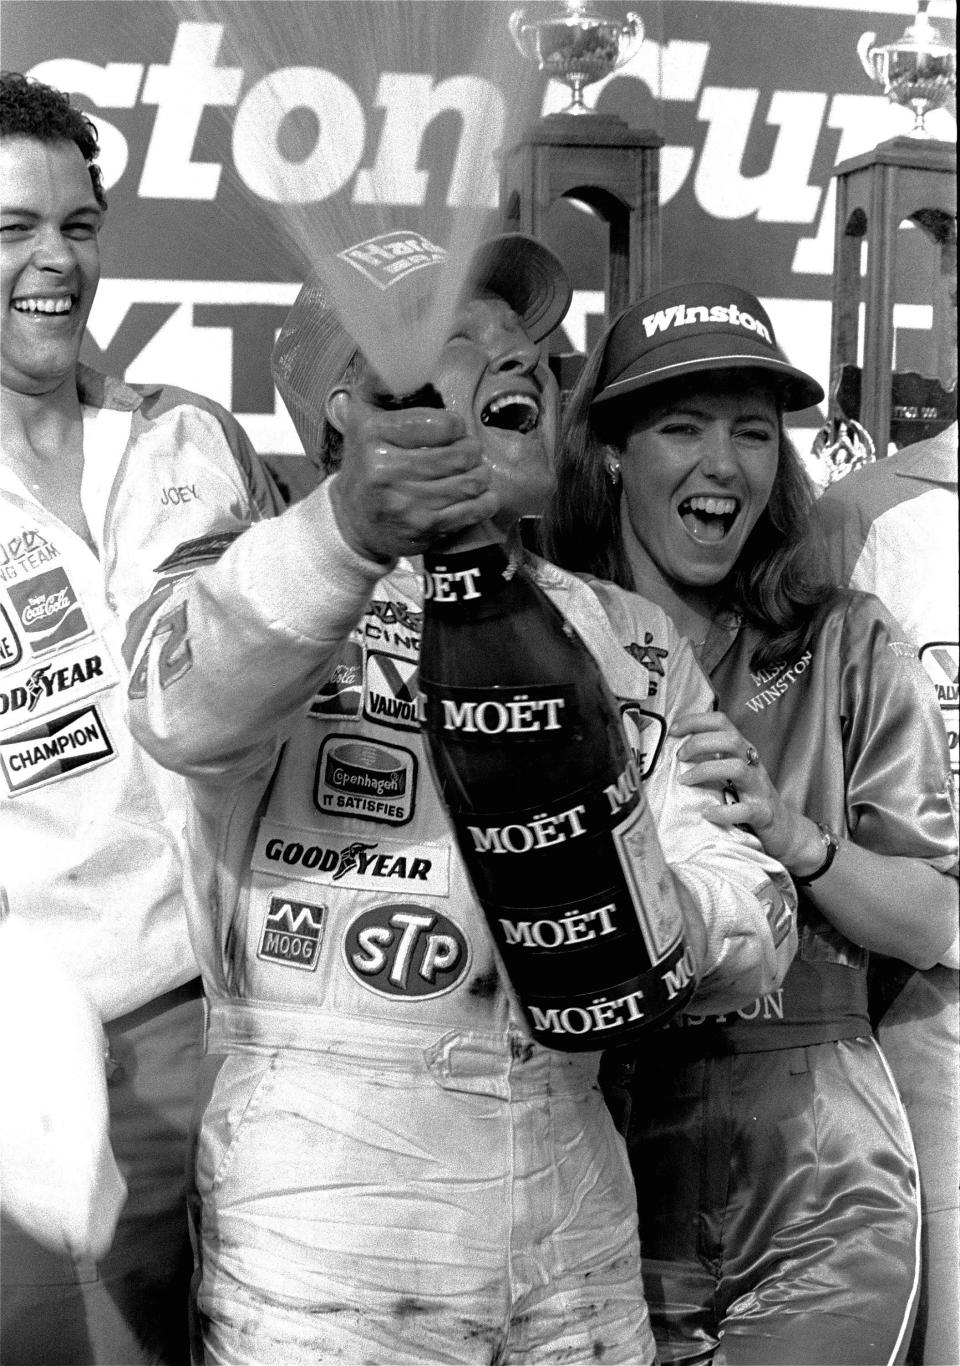 While Richard Petty has the most Daytona 500 wins with seven, Cale Yarborough is next in line with four. Here, he celebrates after driving to the win in 1984.